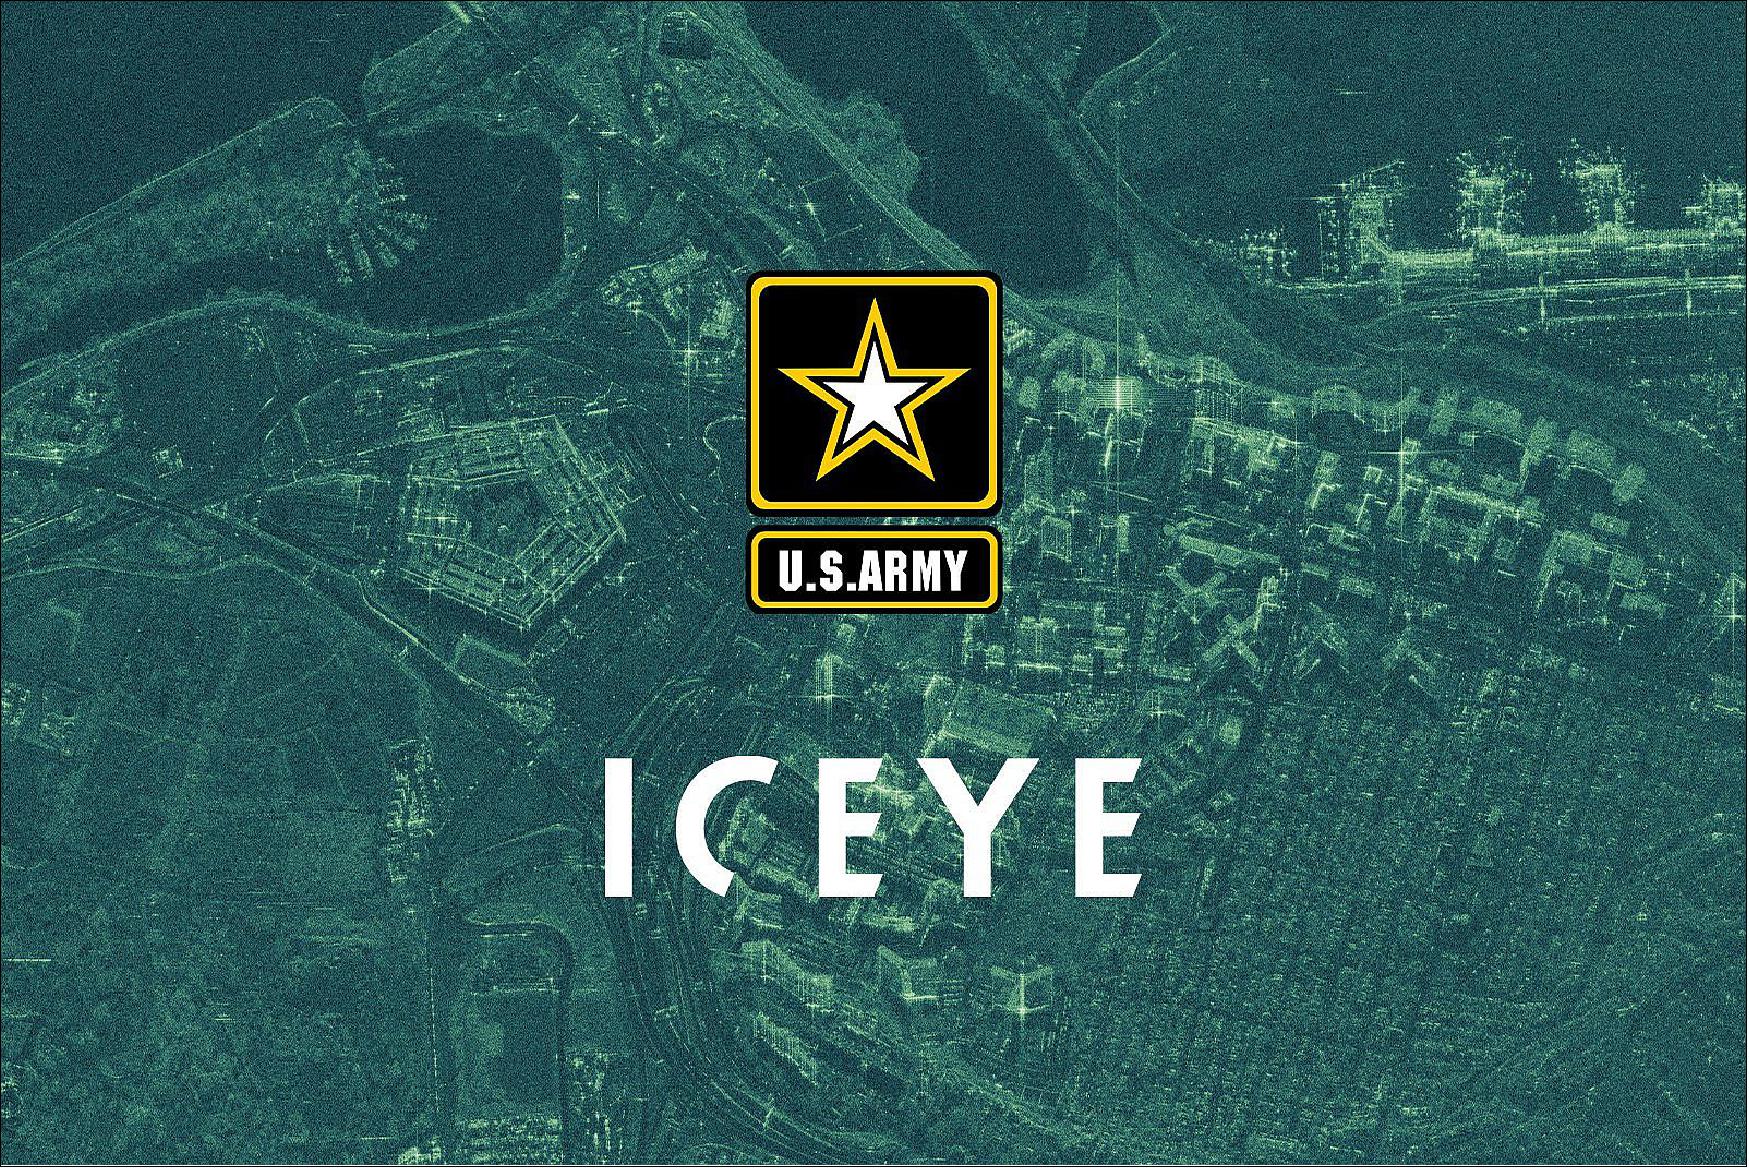 Figure 19: ICEYE and U.S. Army logos with a SAR satellite image of Washington, DC in the background and Arlington,VA (image credit: ICEYE)